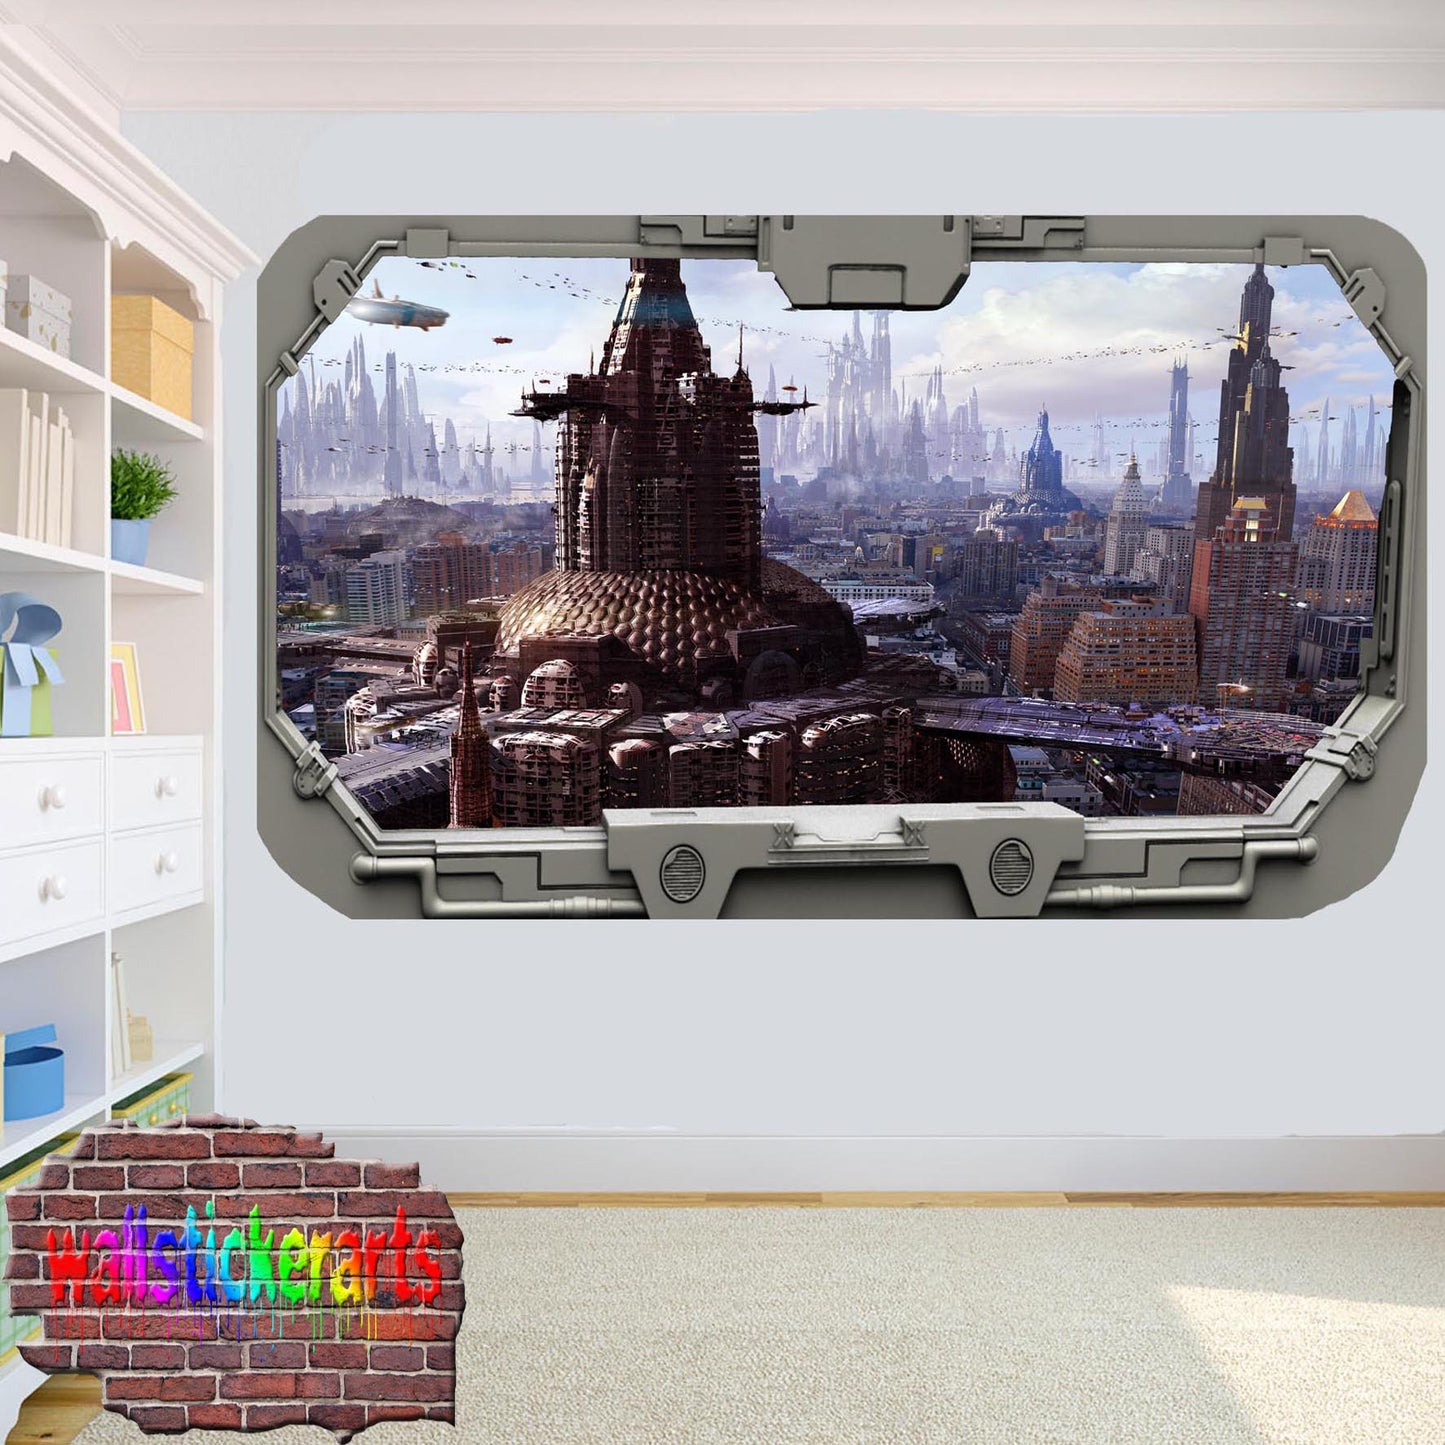 Futuristic City From Spacecraft Window Wall Sticker Room Decoration Decal Mural